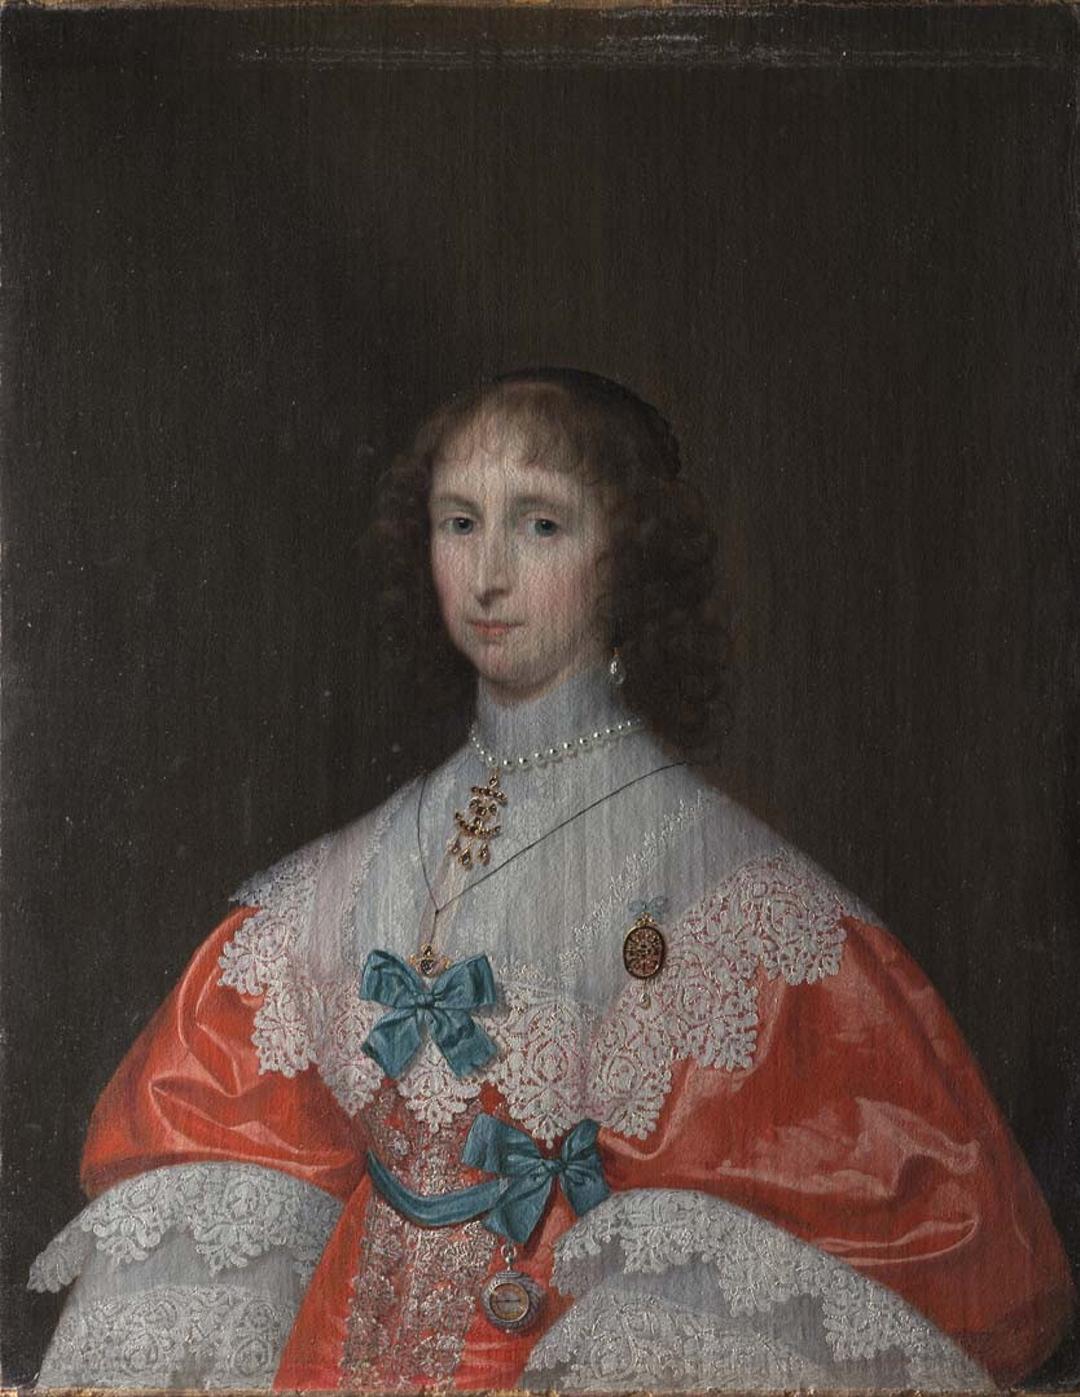 Slider: Raking light, Portrait of a lady, half length, in a red and white dress with blue bows c.1640 JANSSEN VAN CEULEN, Cornelius